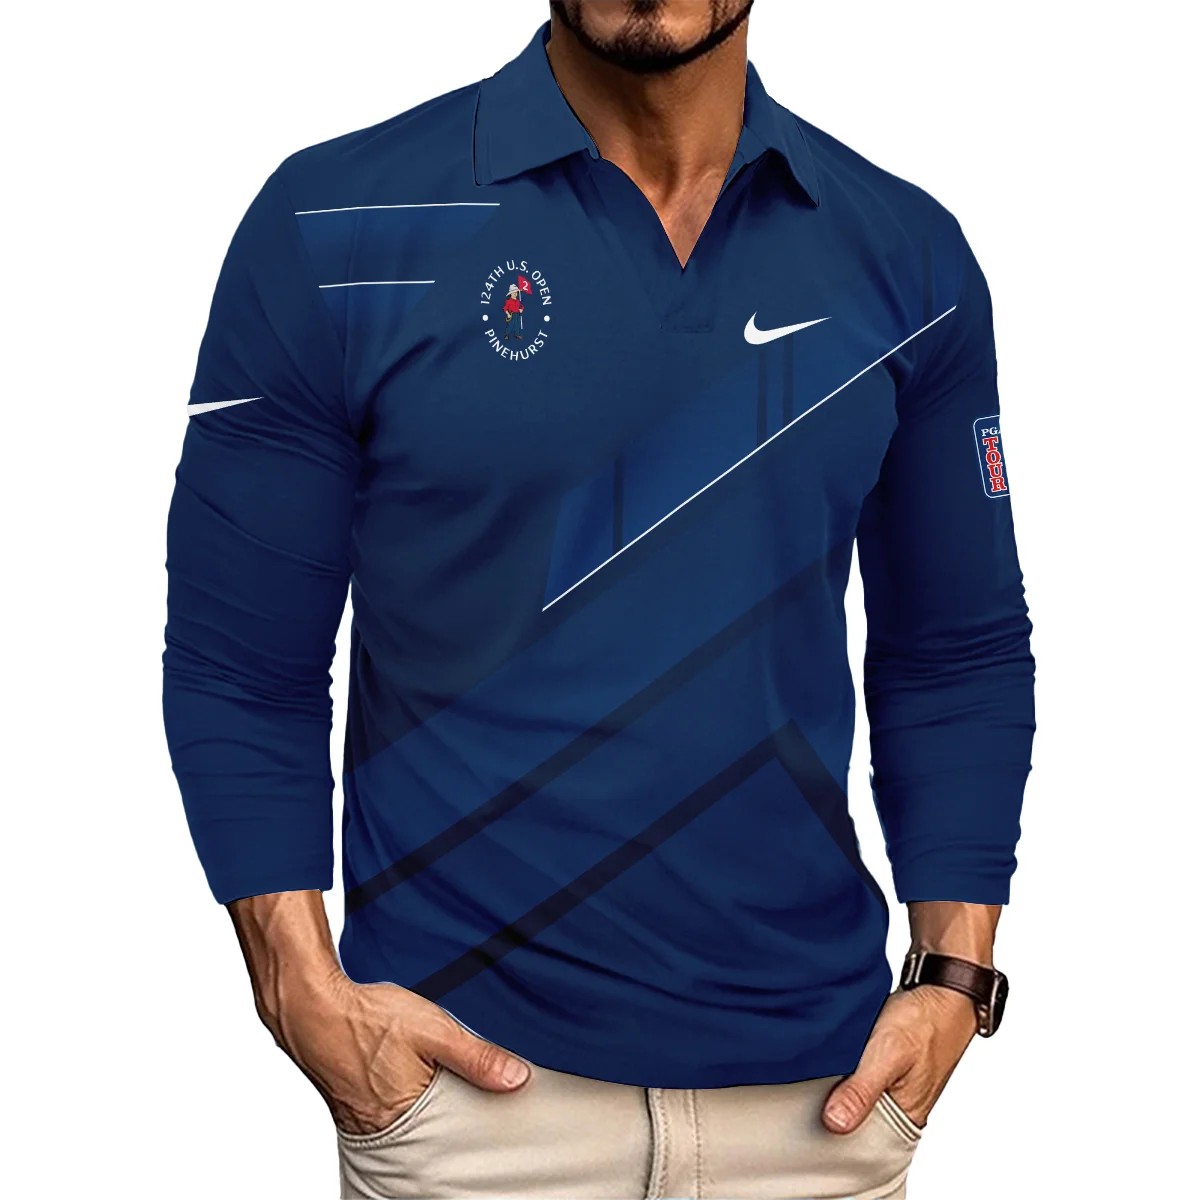 Nike 124th U.S. Open Pinehurst Blue Gradient With White Straight Line Polo Shirt Style Classic Polo Shirt For Men